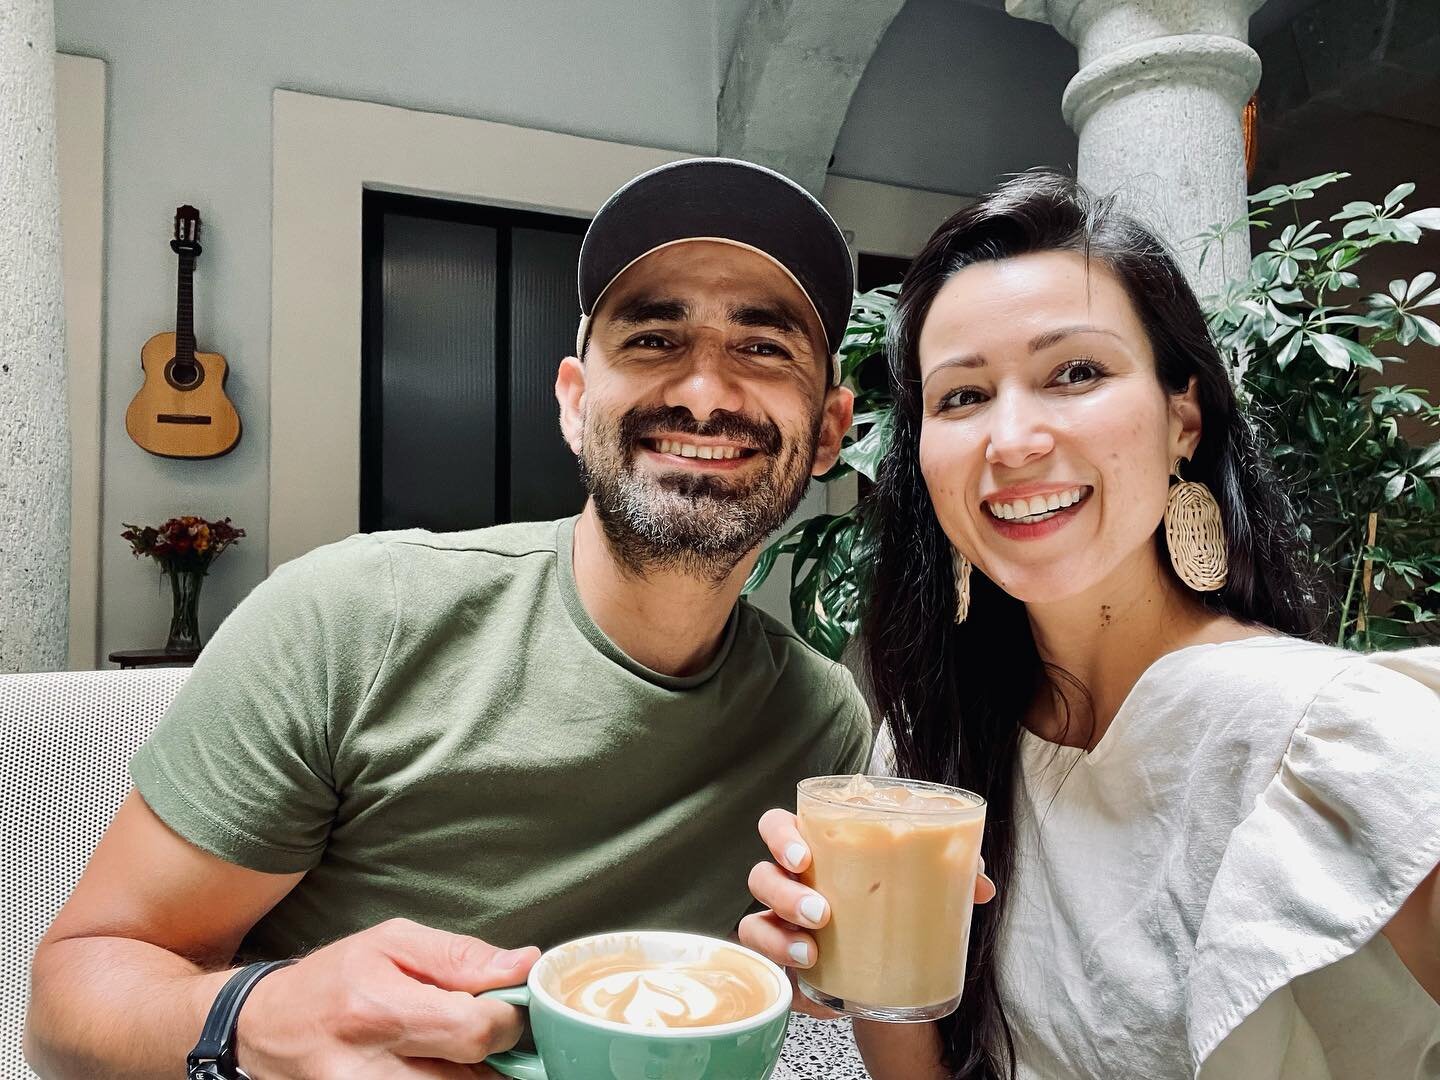 Hola friends! Somos Rosa y Antonio, a husband and wife team, and the creatives behind Azules Design Studio. Whether you're new here or have been following us for a while, we wanted to introduce ourselves and share a little bit more about us!⁠
⁠
✨ We 